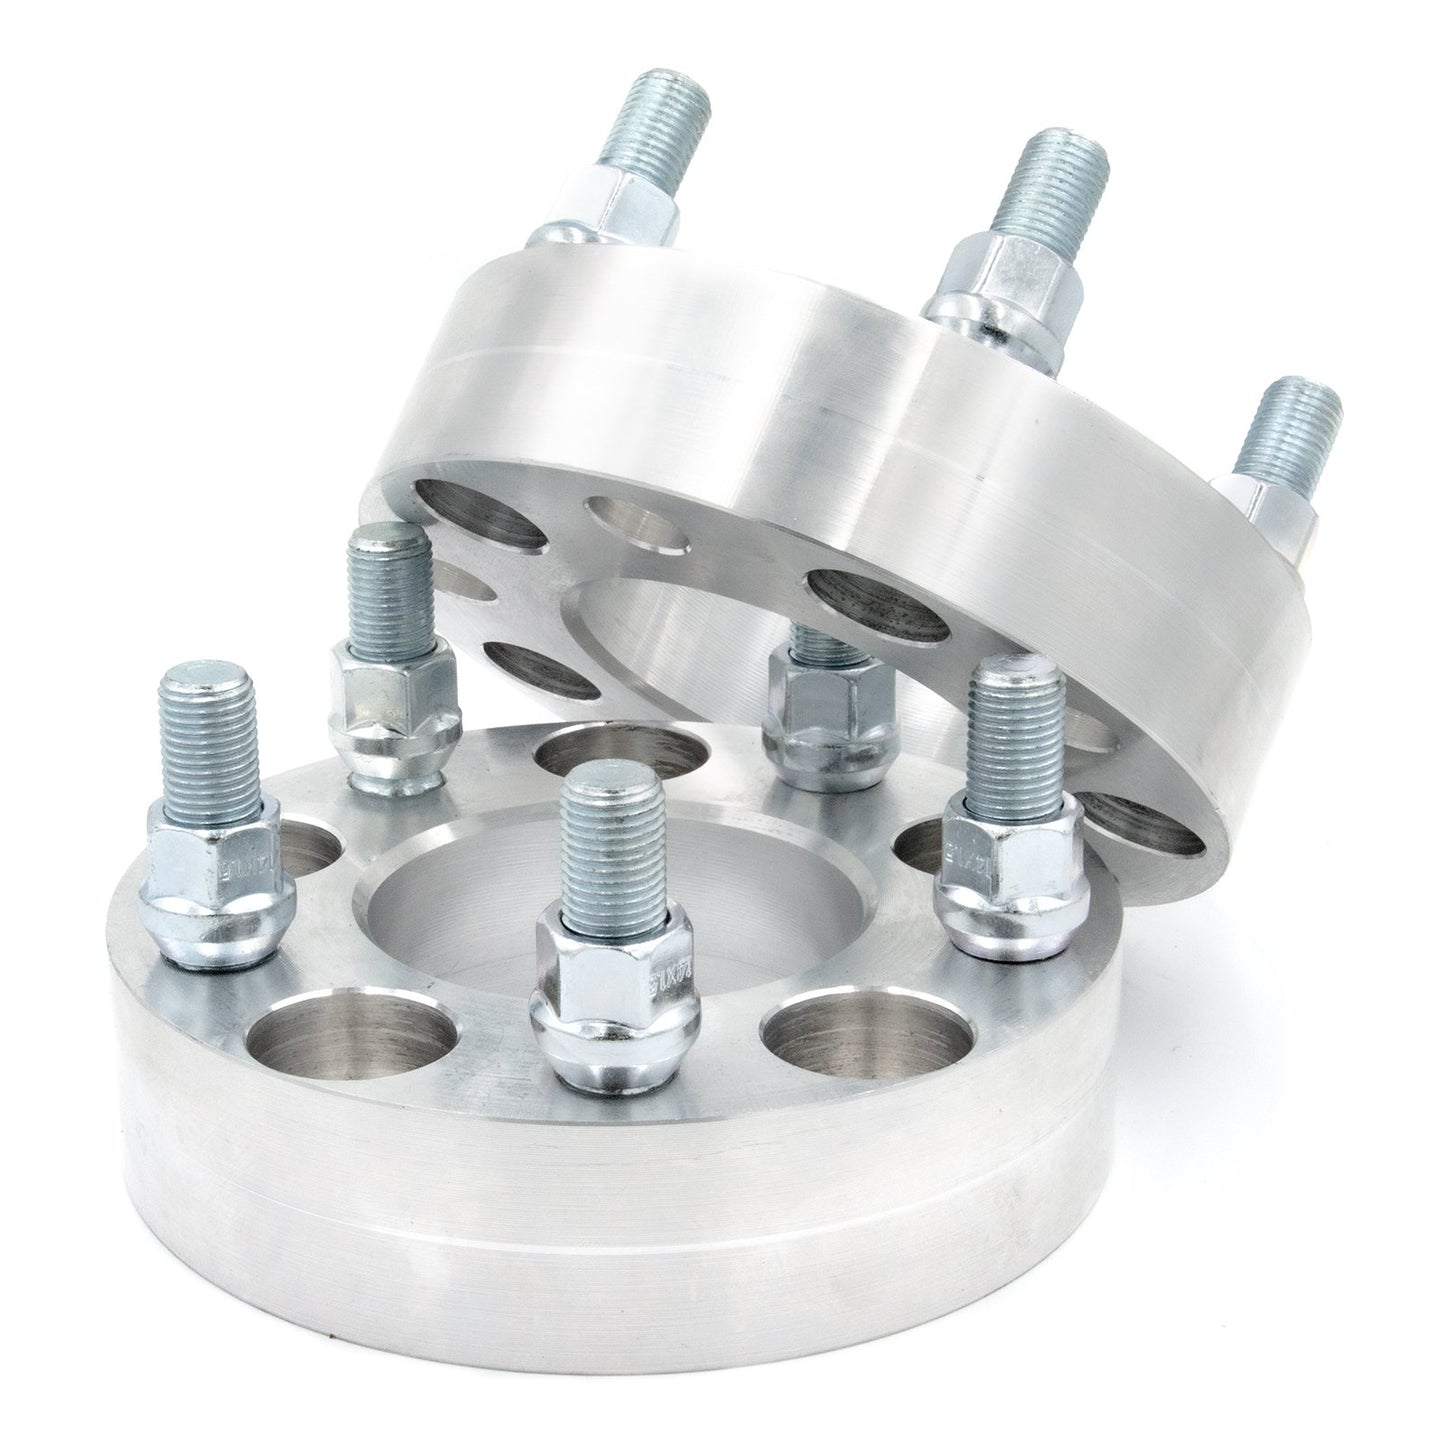 5x110 to 5x135 Wheel Spacer/Adapter - Thickness: 3/4"- 4"